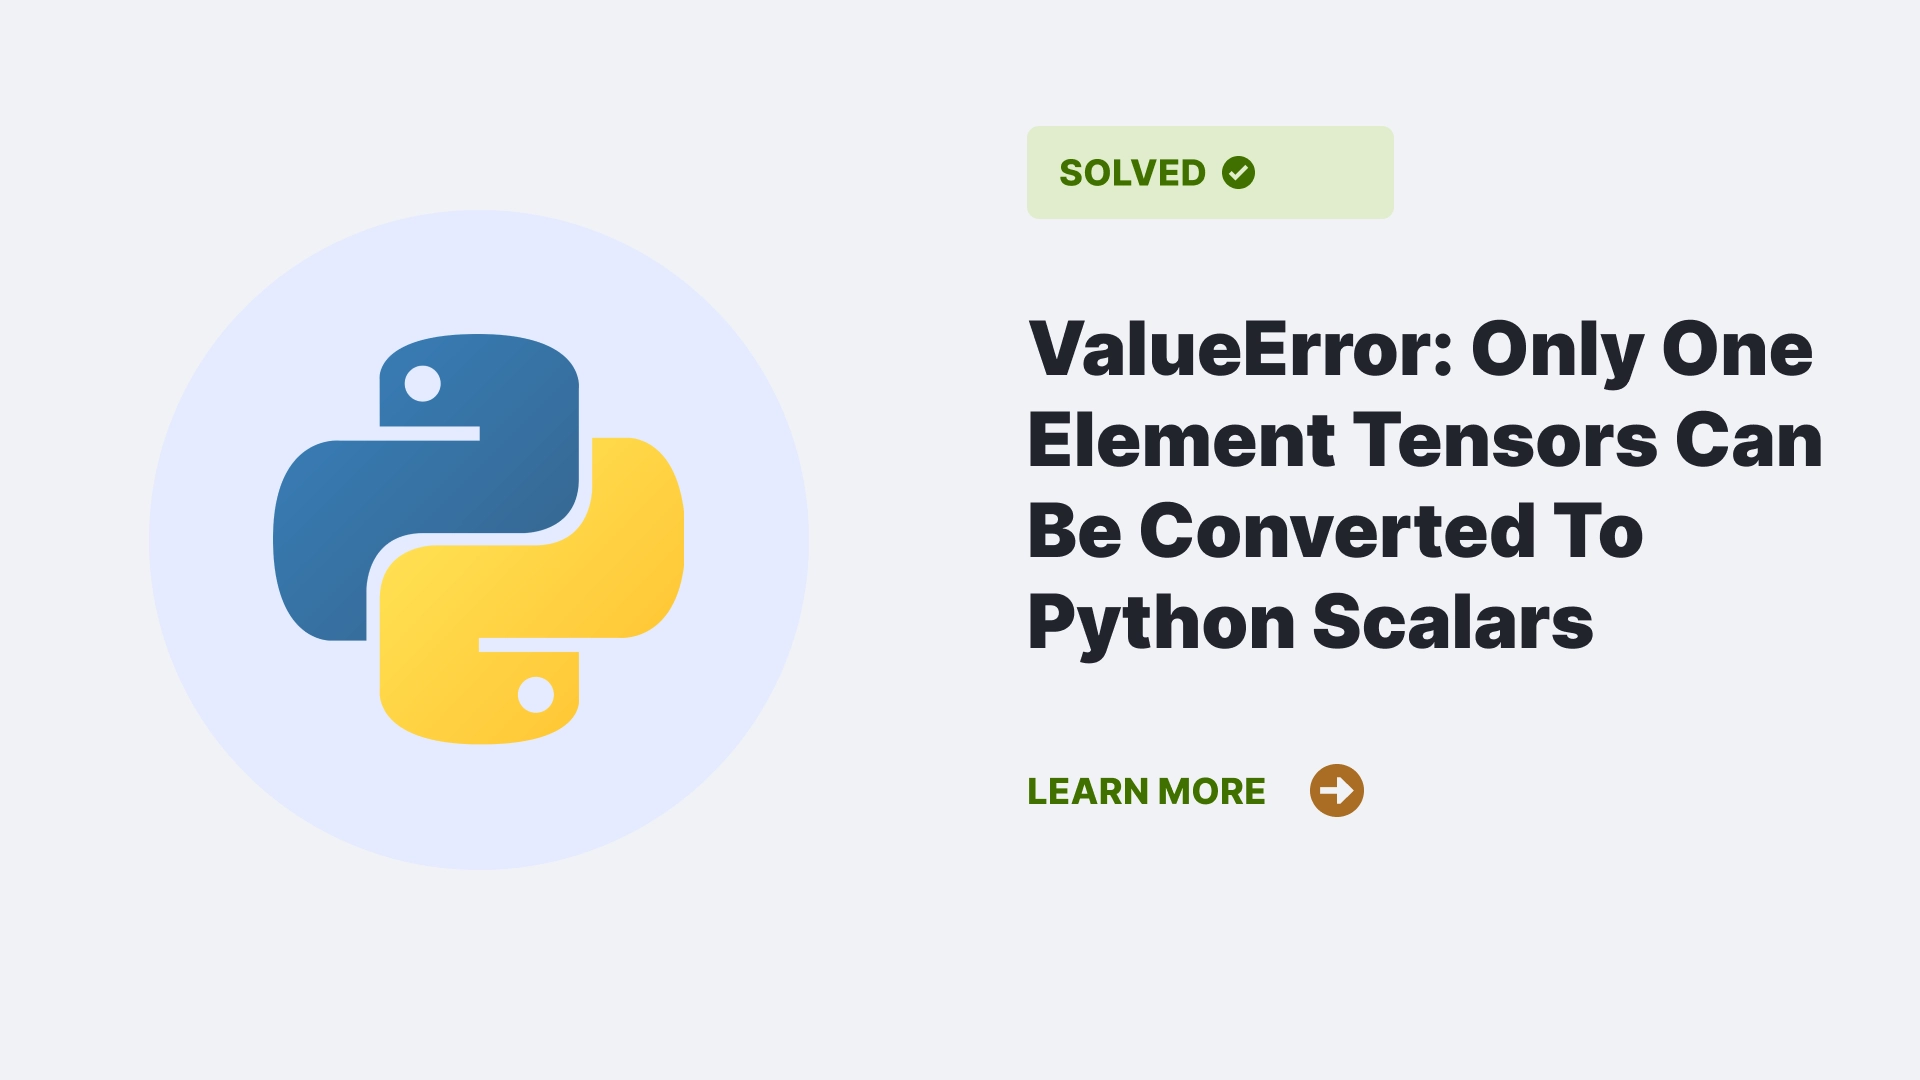 ValueError: Only One Element Tensors Can Be Converted To Python Scalars